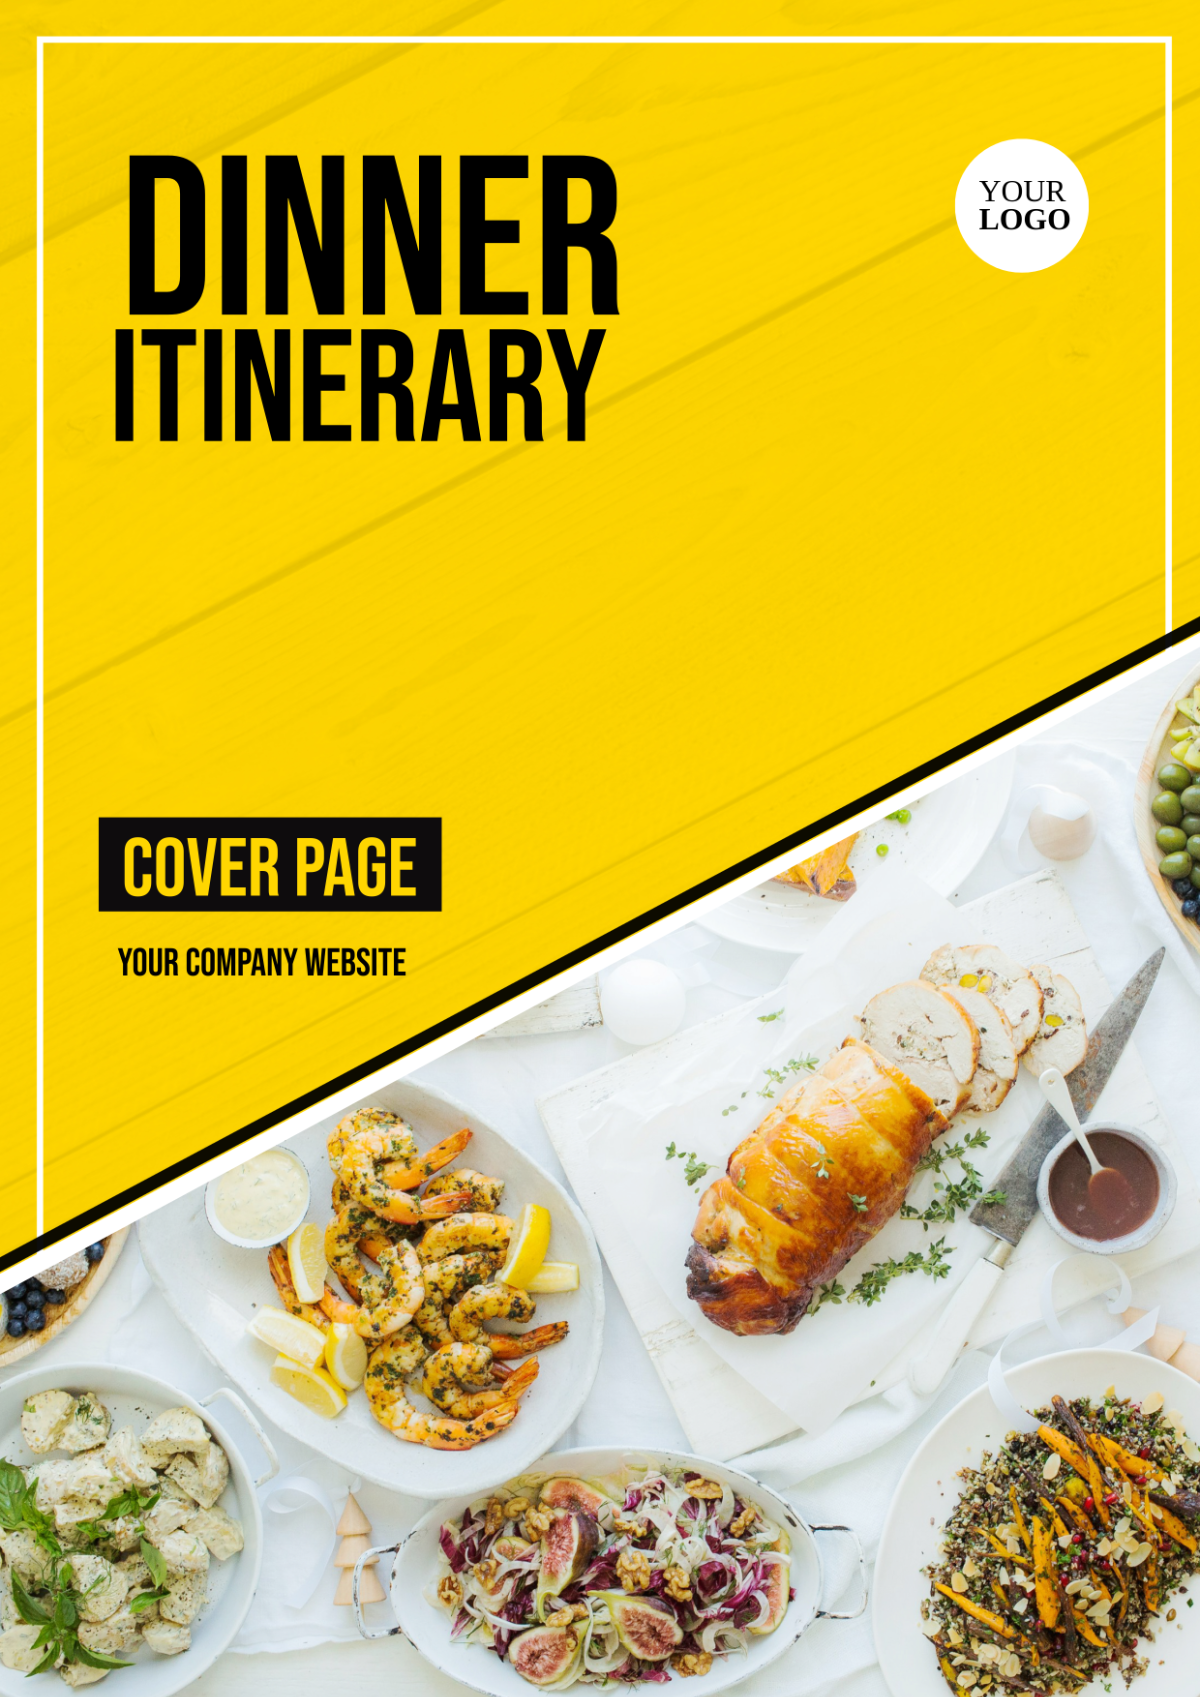 Free Dinner Itinerary Cover Page Template